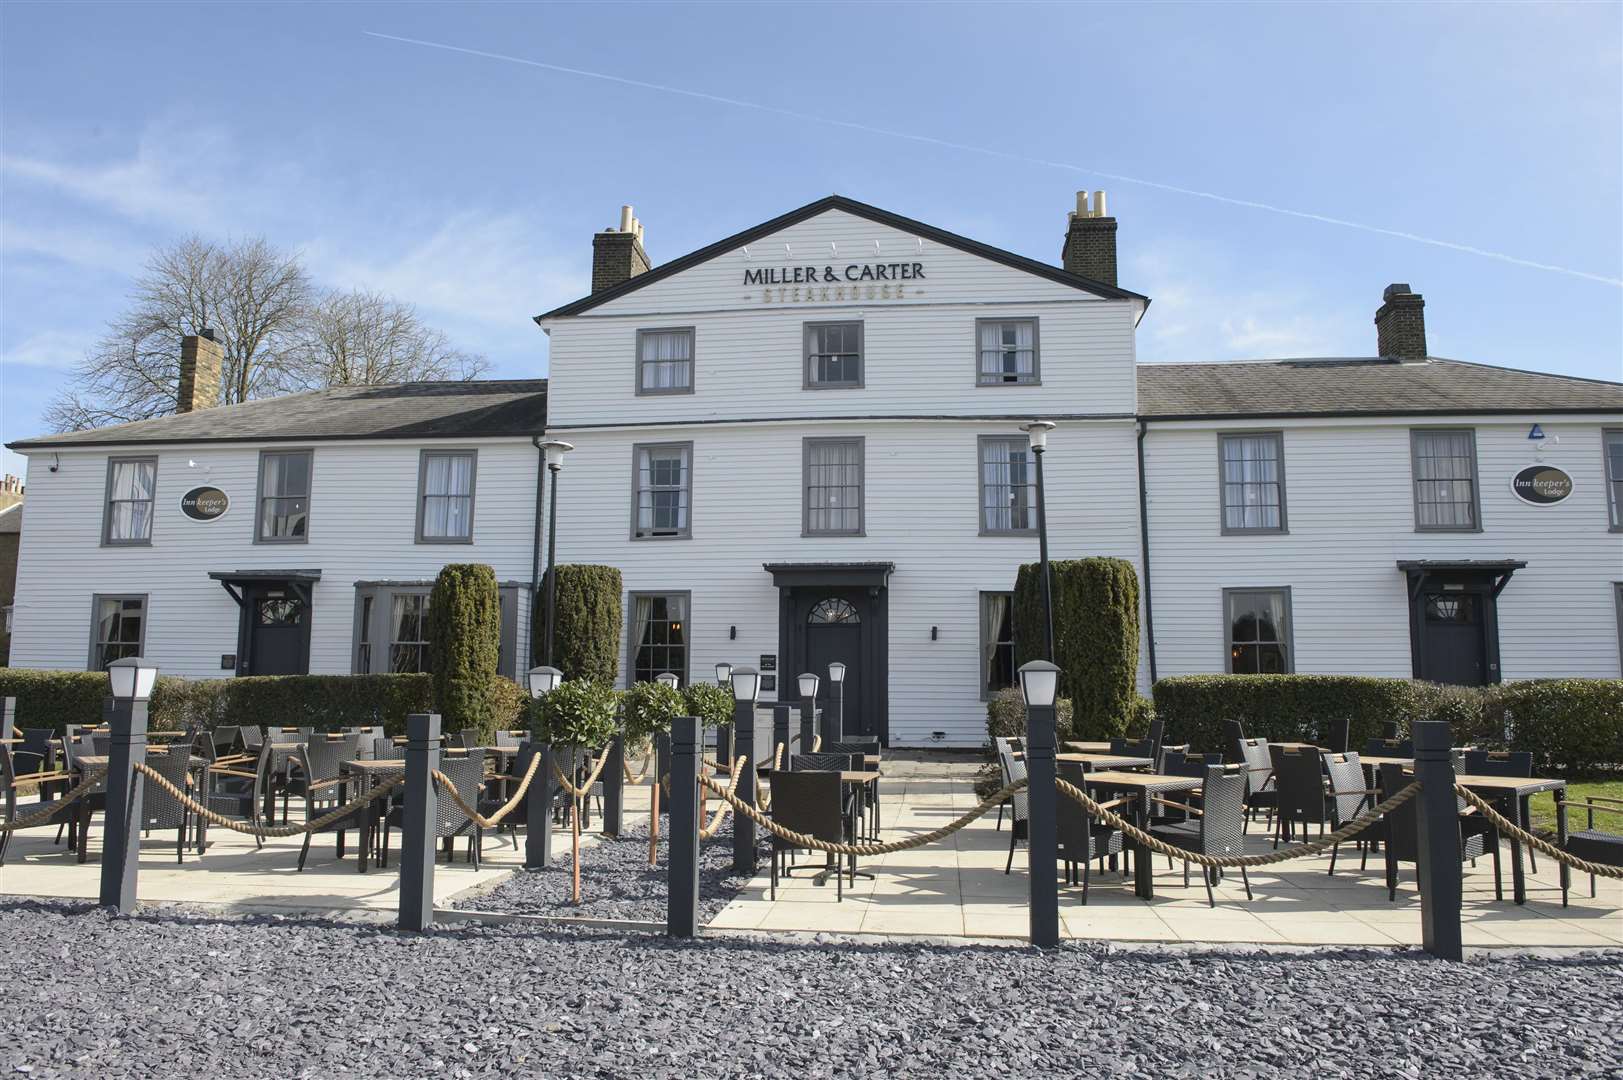 The White Rabbit pub in Maidstone has been converted into a Miller and Carter steakhouse